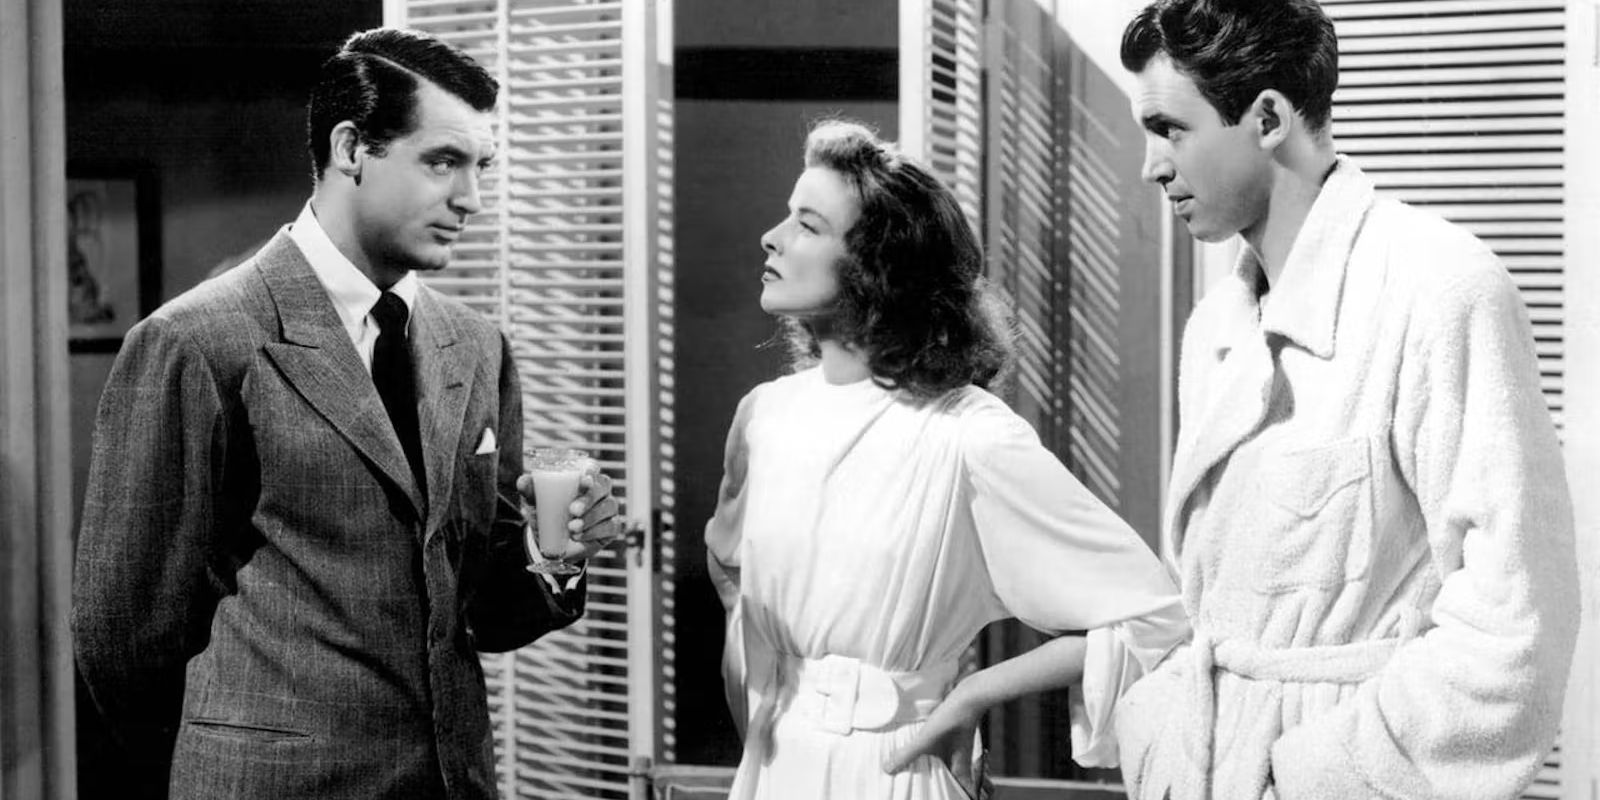 Dexter, Tracy and Mike speaking on The Philadelphia Story.